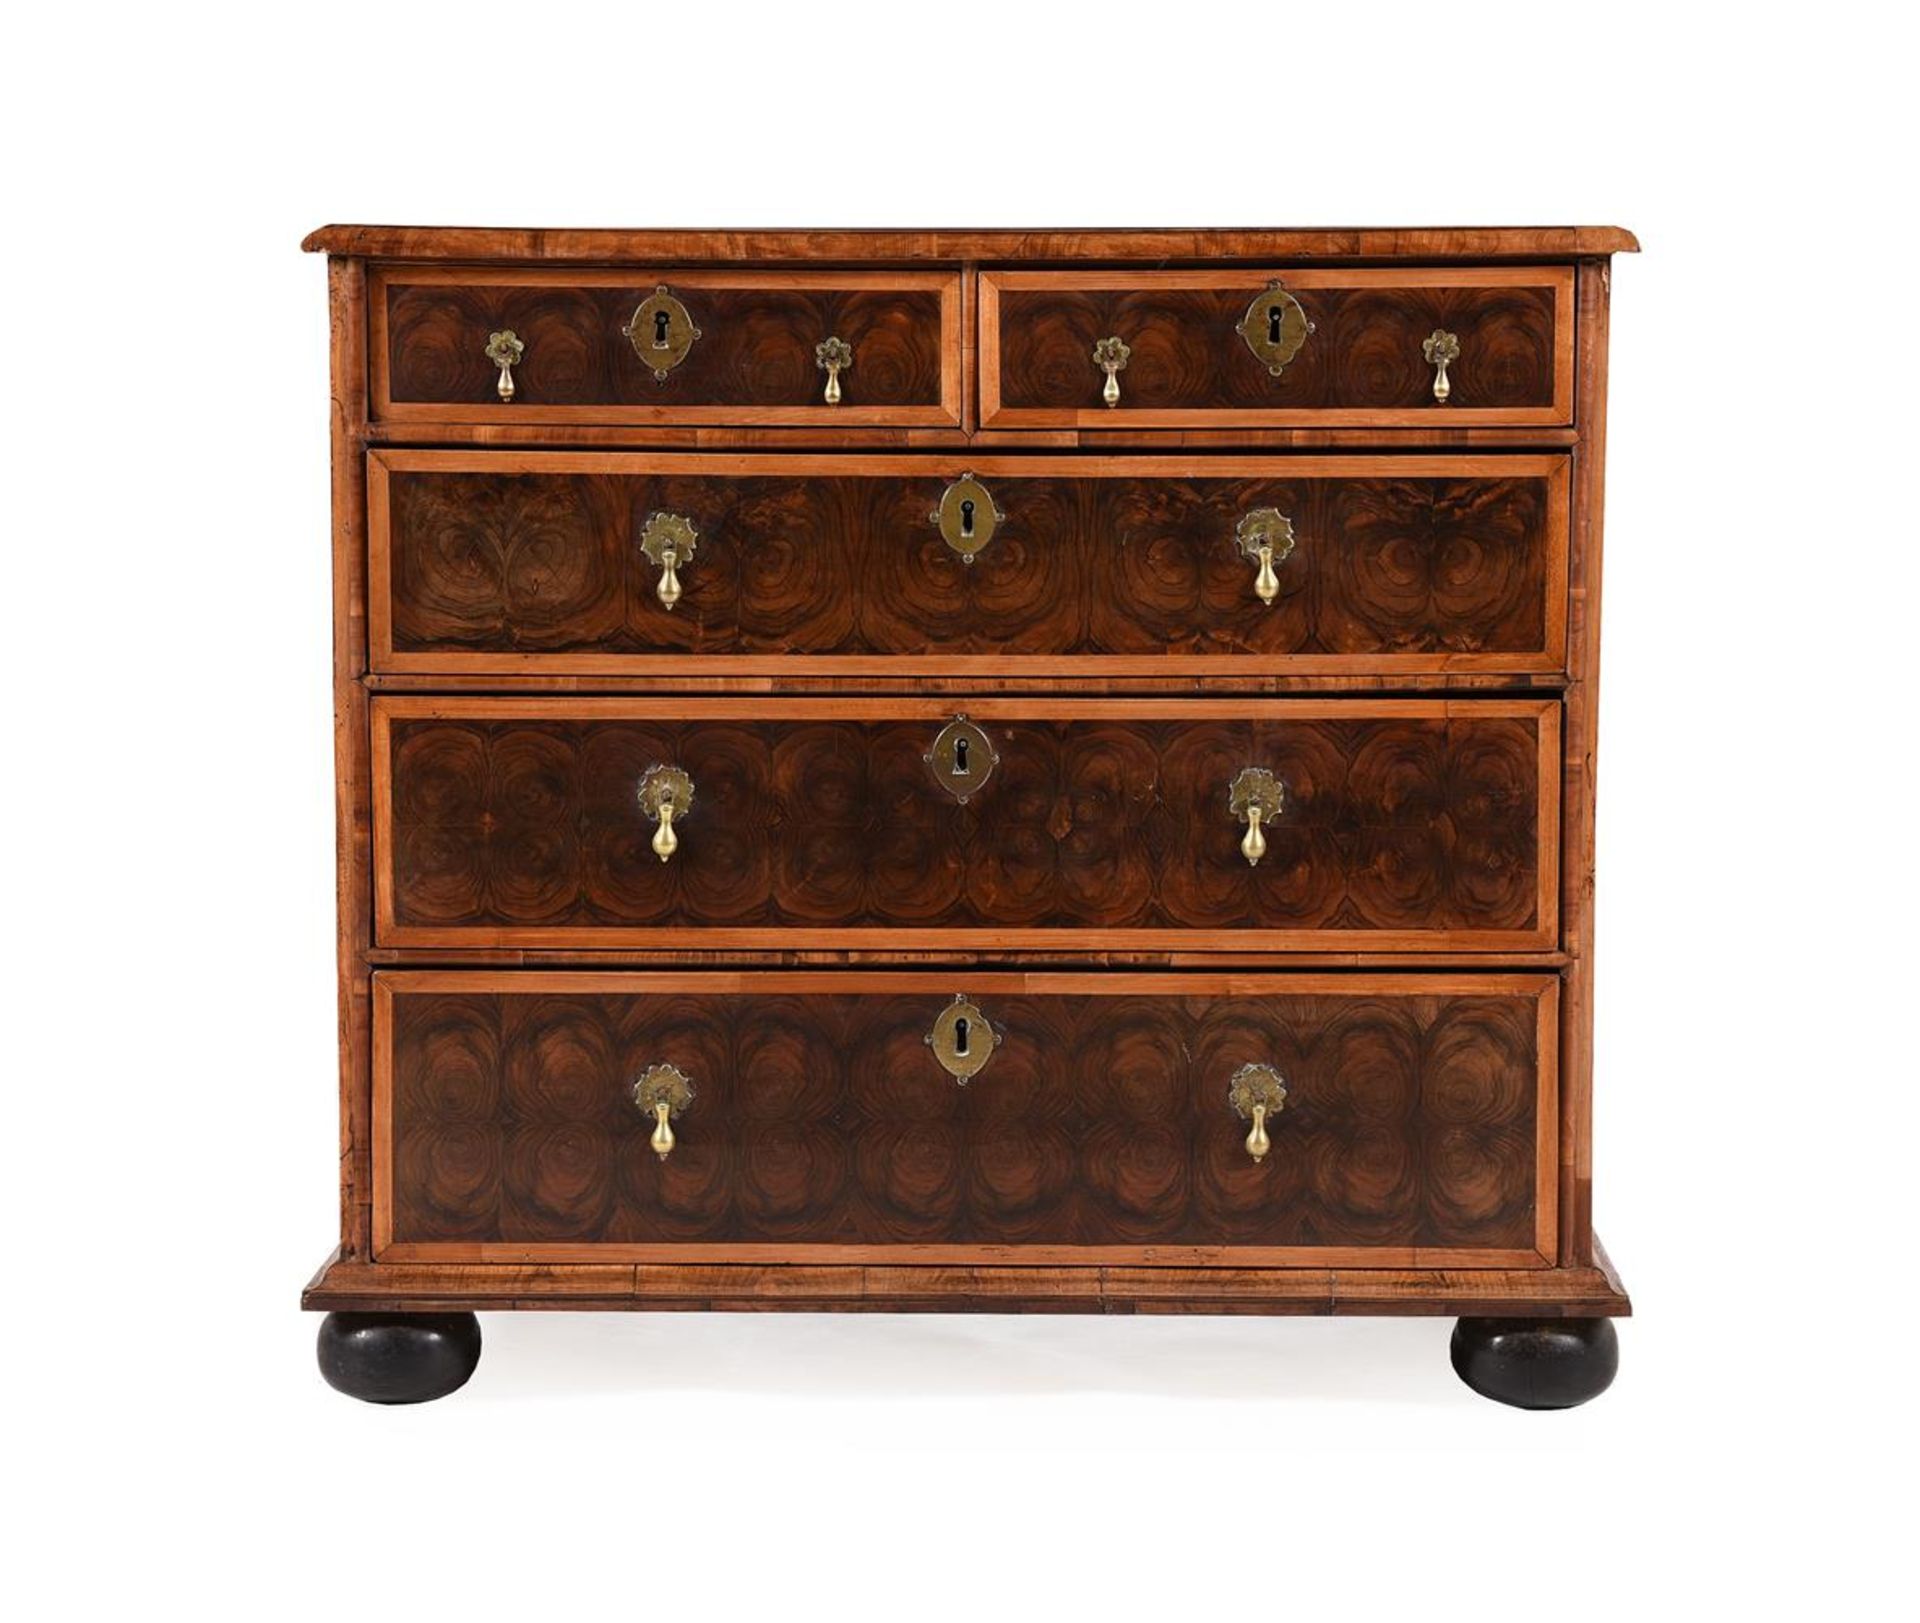 A WILLIAM & MARY OLIVEWOOD 'OYSTER' VENEERED AND MARQUETRY CHEST OF DRAWERS, CIRCA 1690